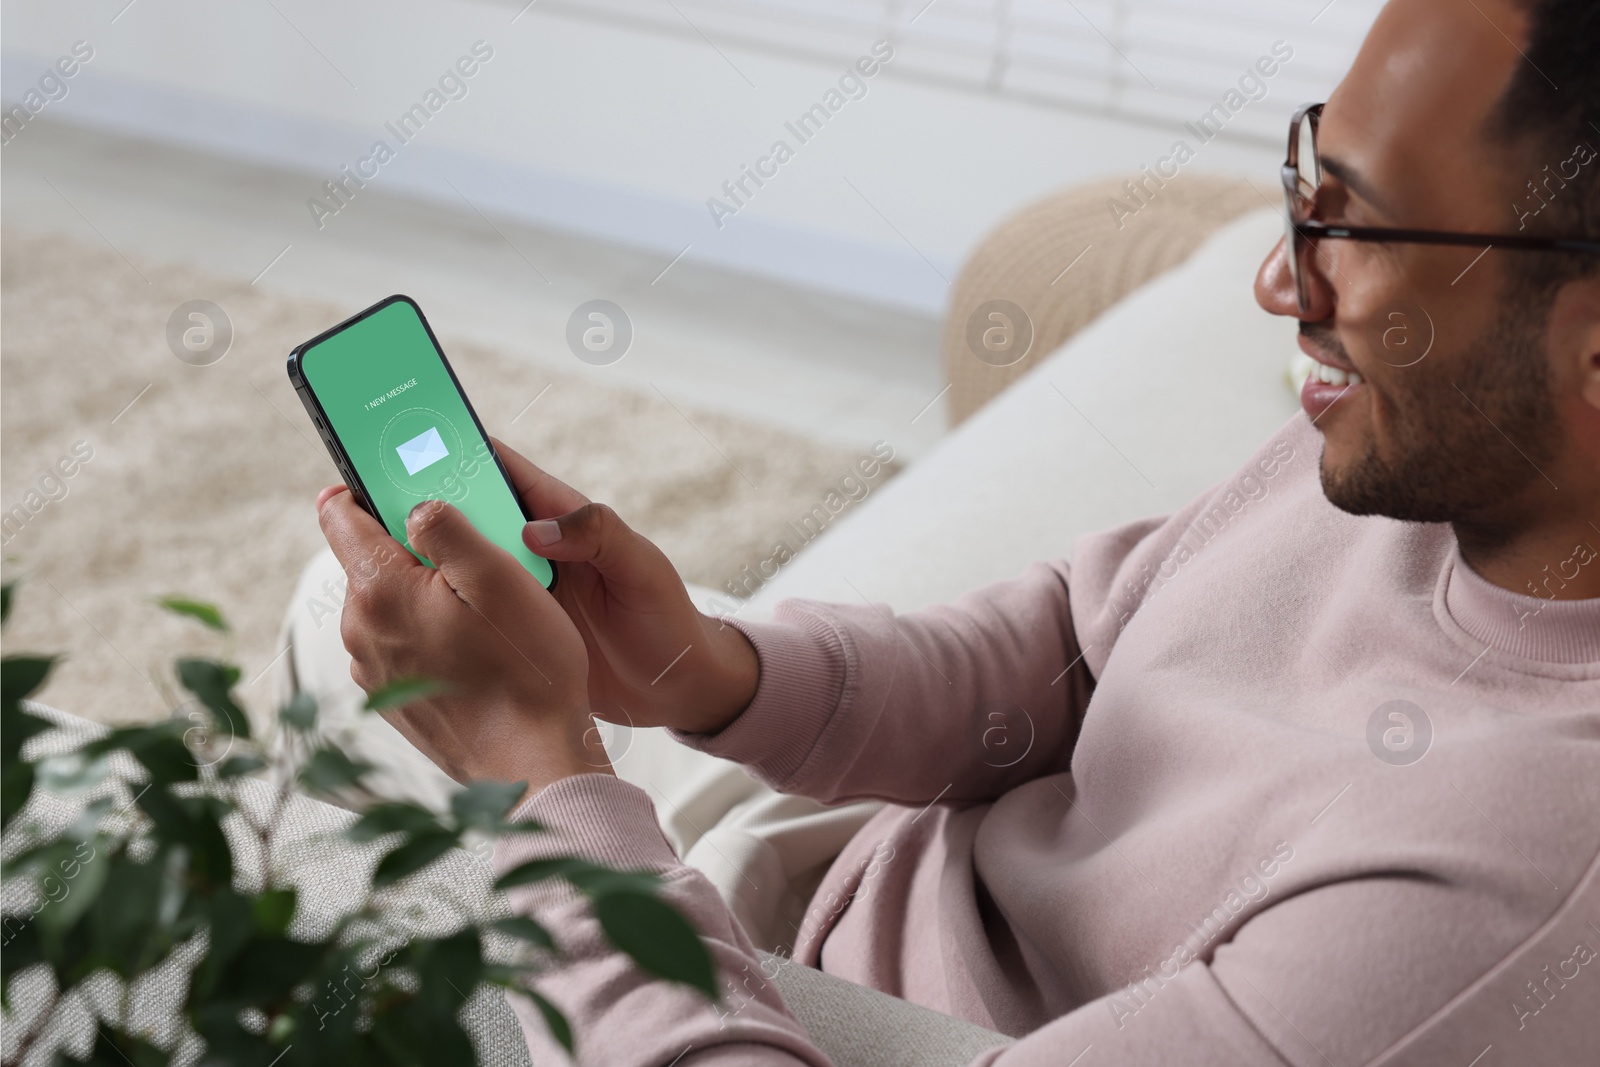 Image of Man checking new message on mobile phone indoors